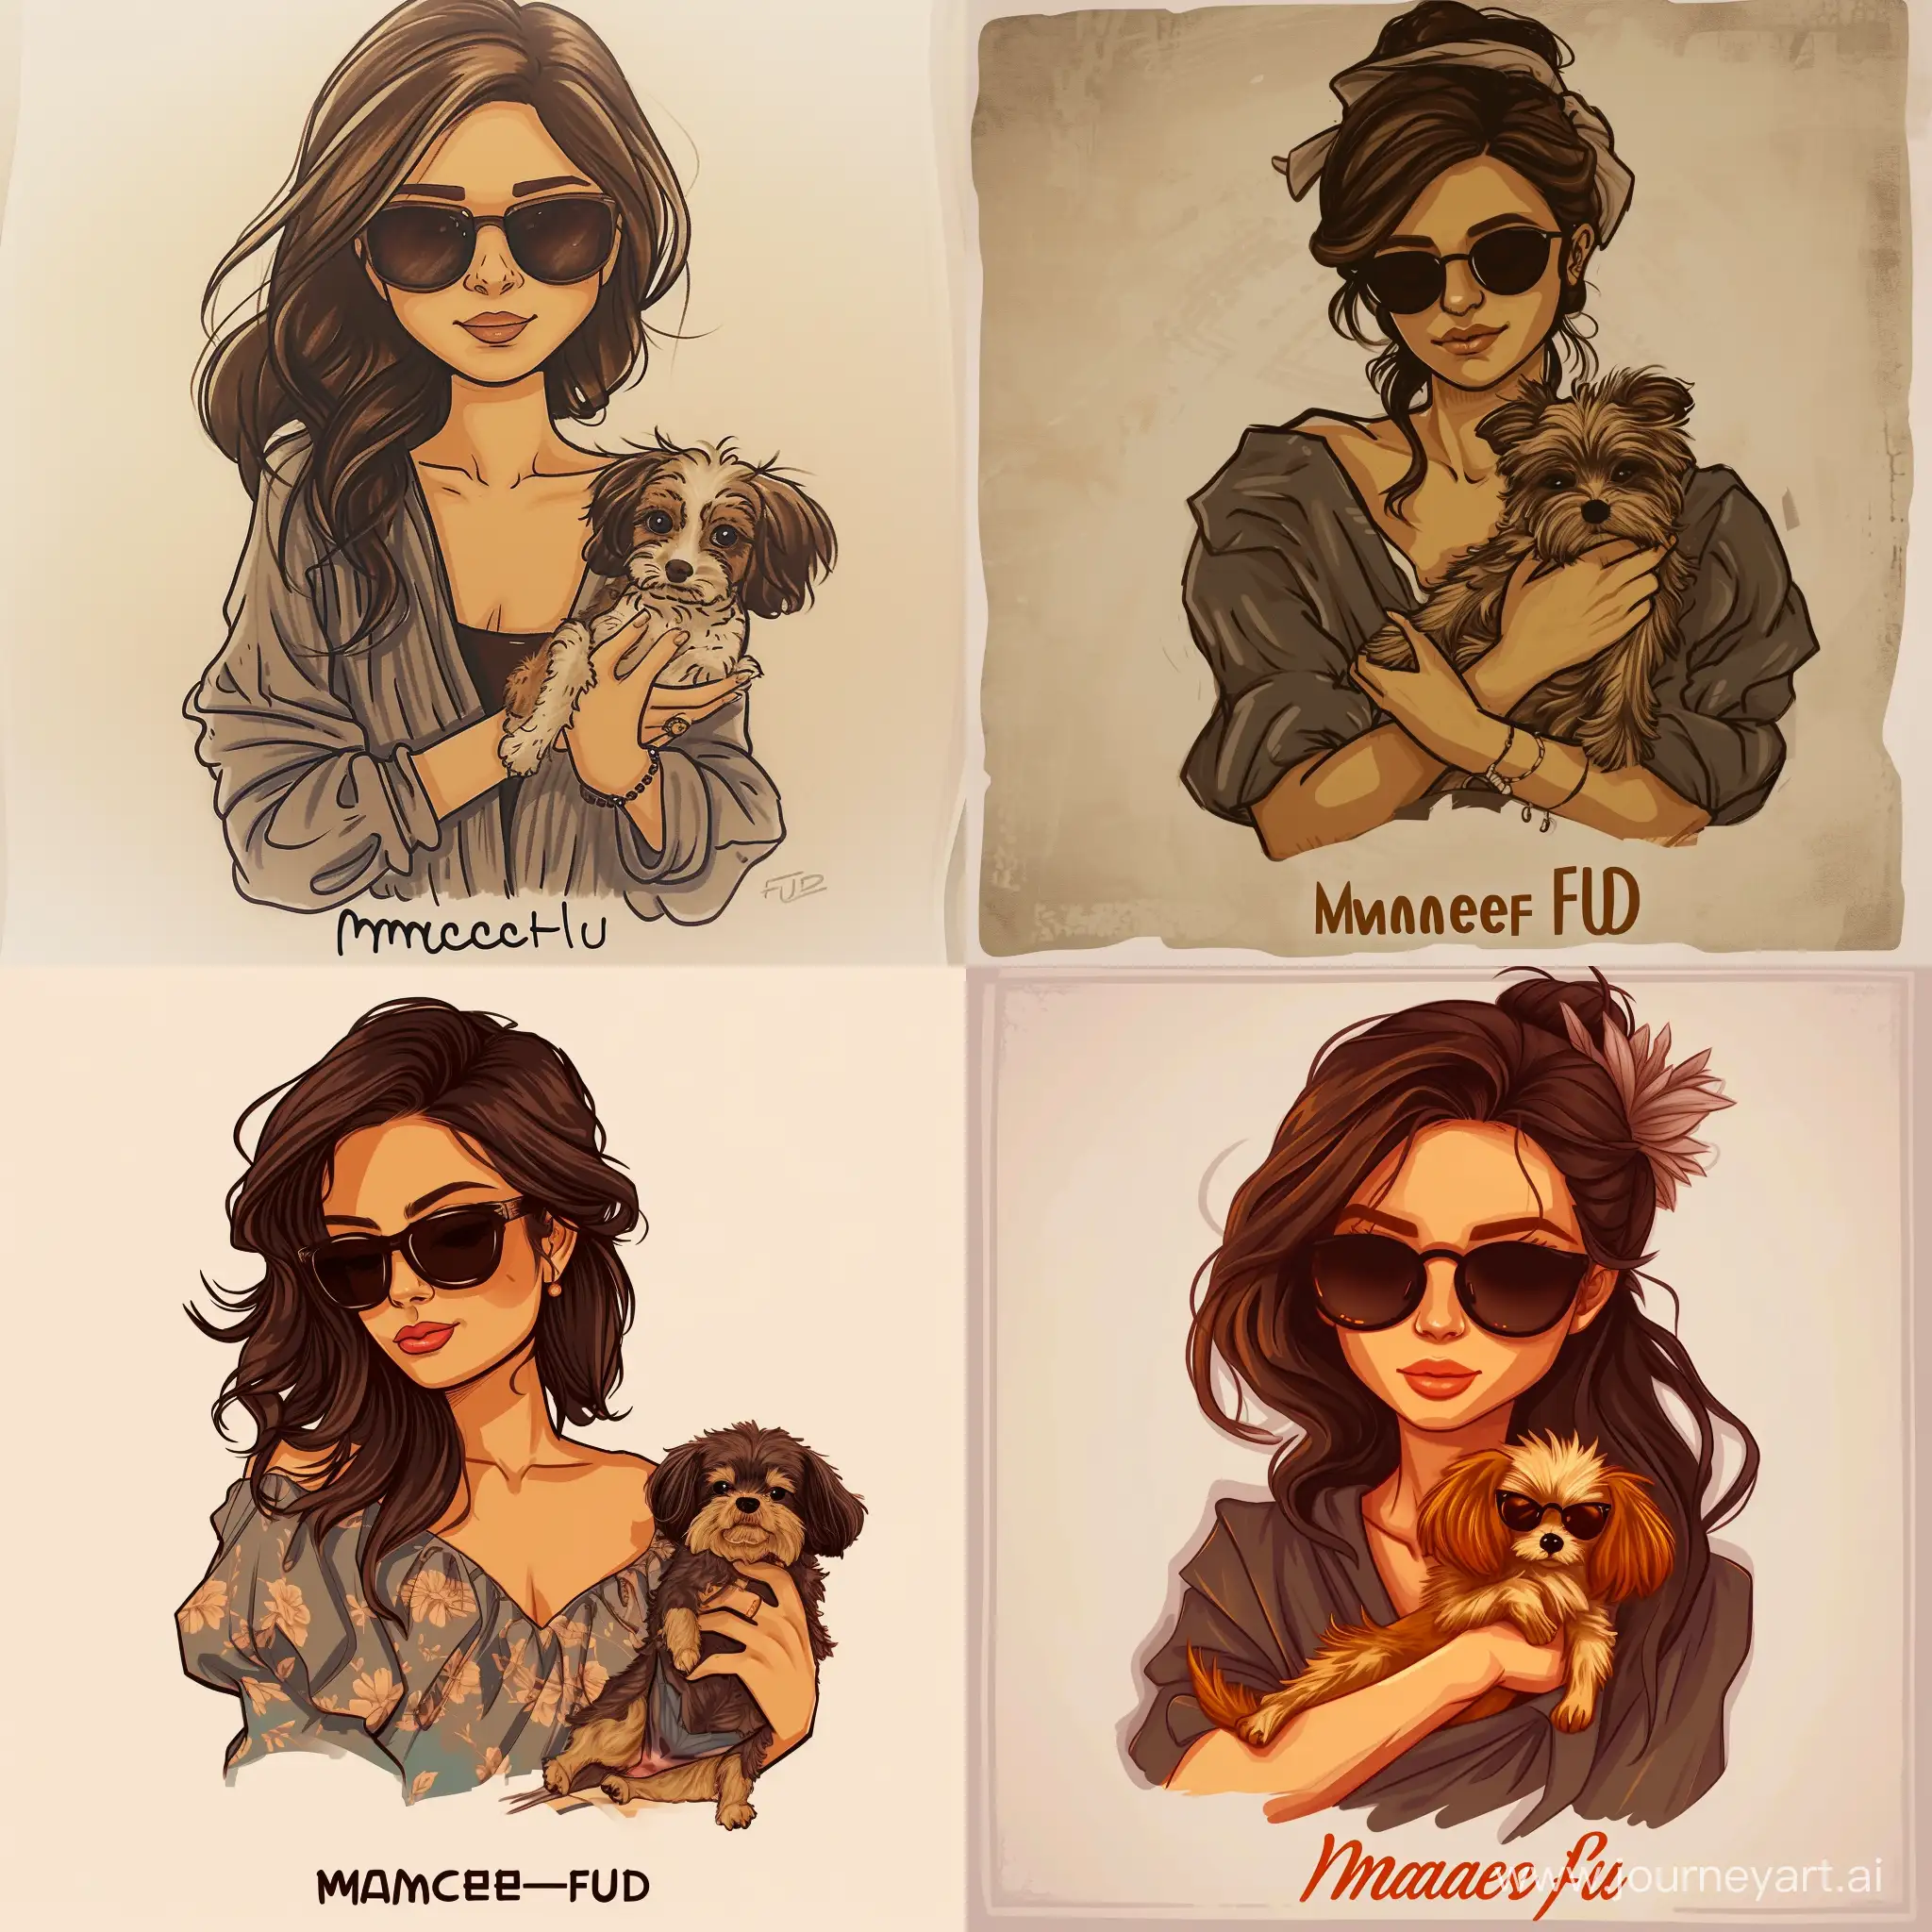 Stylish-Girl-with-Dark-Brown-Hair-and-Chic-Sunglasses-Holding-a-Cute-Dog-MadameFUD